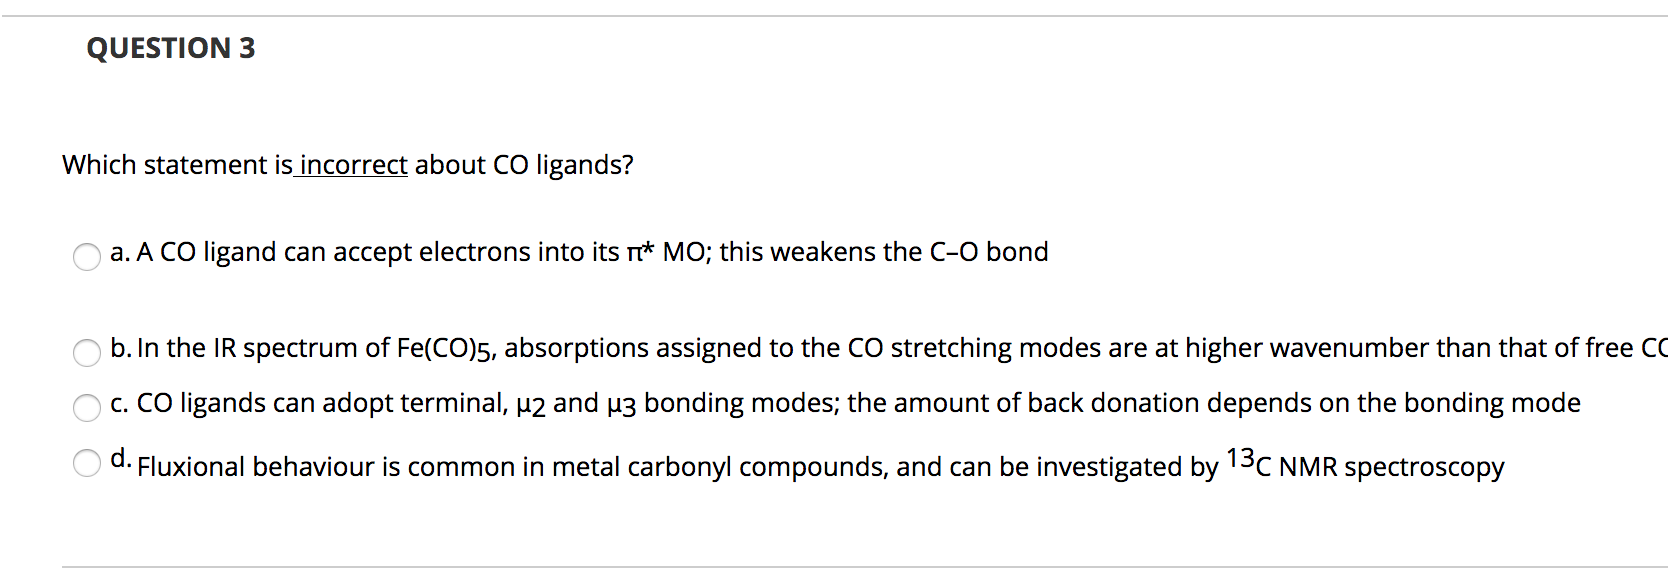 Which statement is incorrect about CO ligands?
a. A CO ligand can accept electrons into its * MO; this weakens the C-O bond
b. In the IR spectrum of Fe(CO)5, absorptions assigned to the CO stretching modes are at higher wavenumber than that of free
c. CO ligands can adopt terminal, p2 and u3 bonding modes; the amount of back donation depends on the bonding mode
d.
Fluxional behaviour is common in metal carbonyl compounds, and can be investigated by 13C NMR spectroscopy
